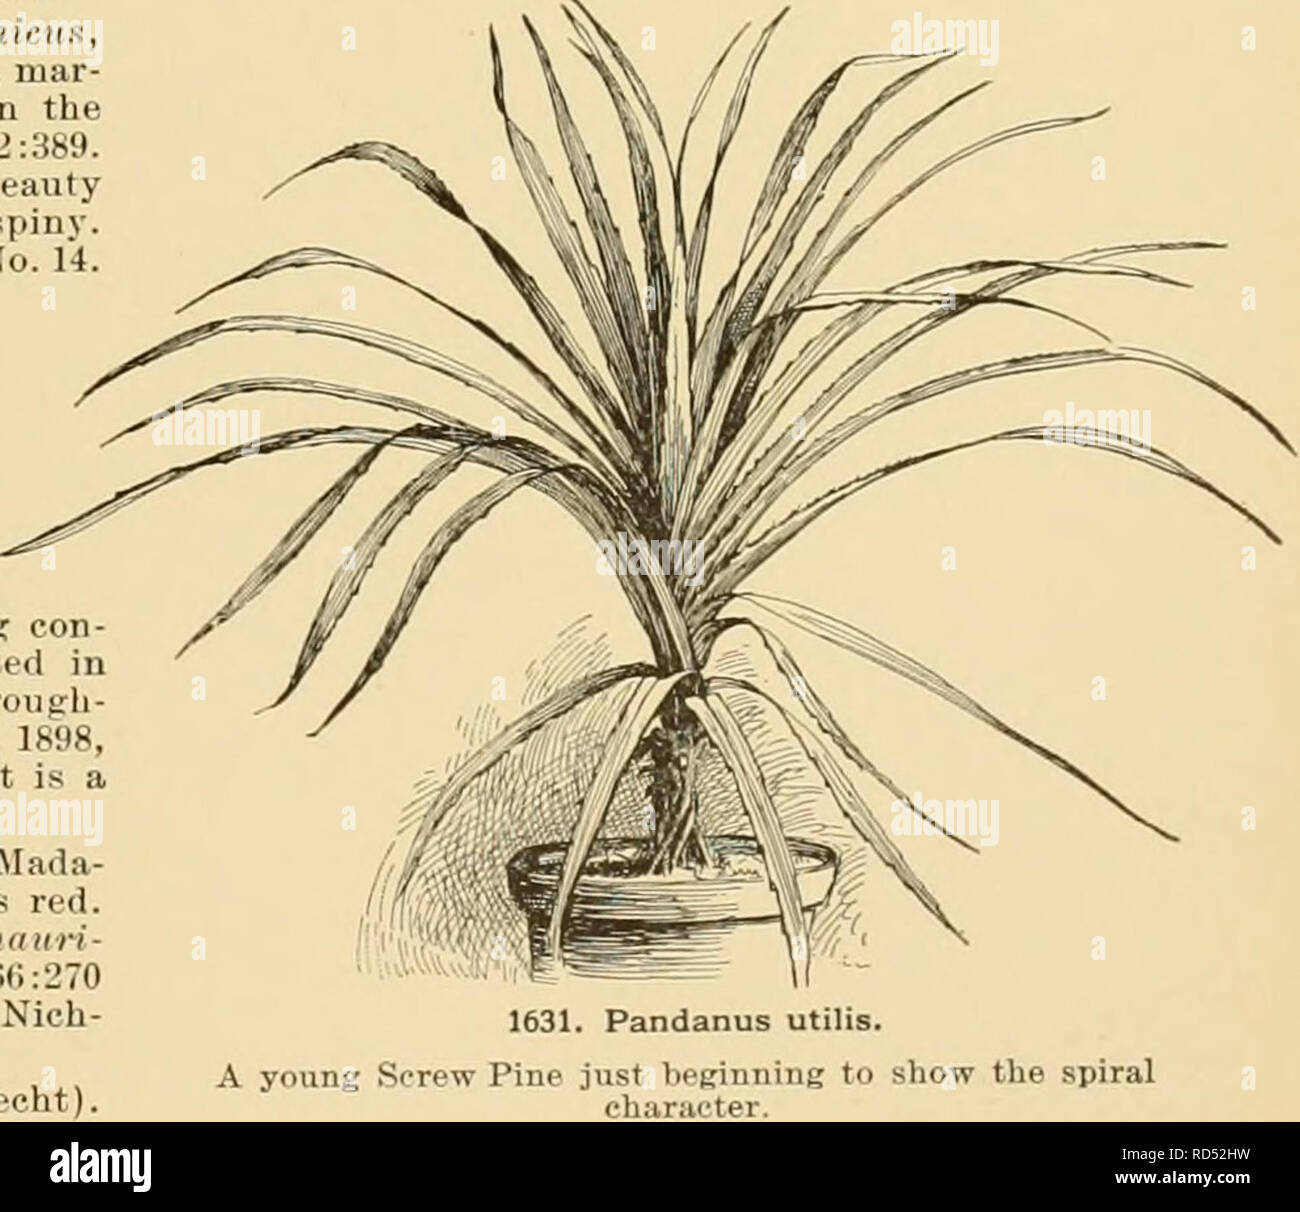 . Cyclopedia of American horticulture : comprising suggestions for cultivation of horticultural plants, descriptions of the species of fruits, vegetables, flowers, and ornamental plants sold in the United States and Canada, together with geographical and biographical sketches. Gardening; Horticulture; Horticulture; Horticulture. PANDANUS 1201 The prrowth of the plant also appears more graceful, the leaves being recurved in a more pleasing manner, and suckers very freely. j. D. Eisele. Bapfistii, 3. granliiiifolius, 8. reflexus, 13. ( ':indelllbruni. 2. 14, heteroparpus, 10. Sanderi, 4. raricos Stock Photo